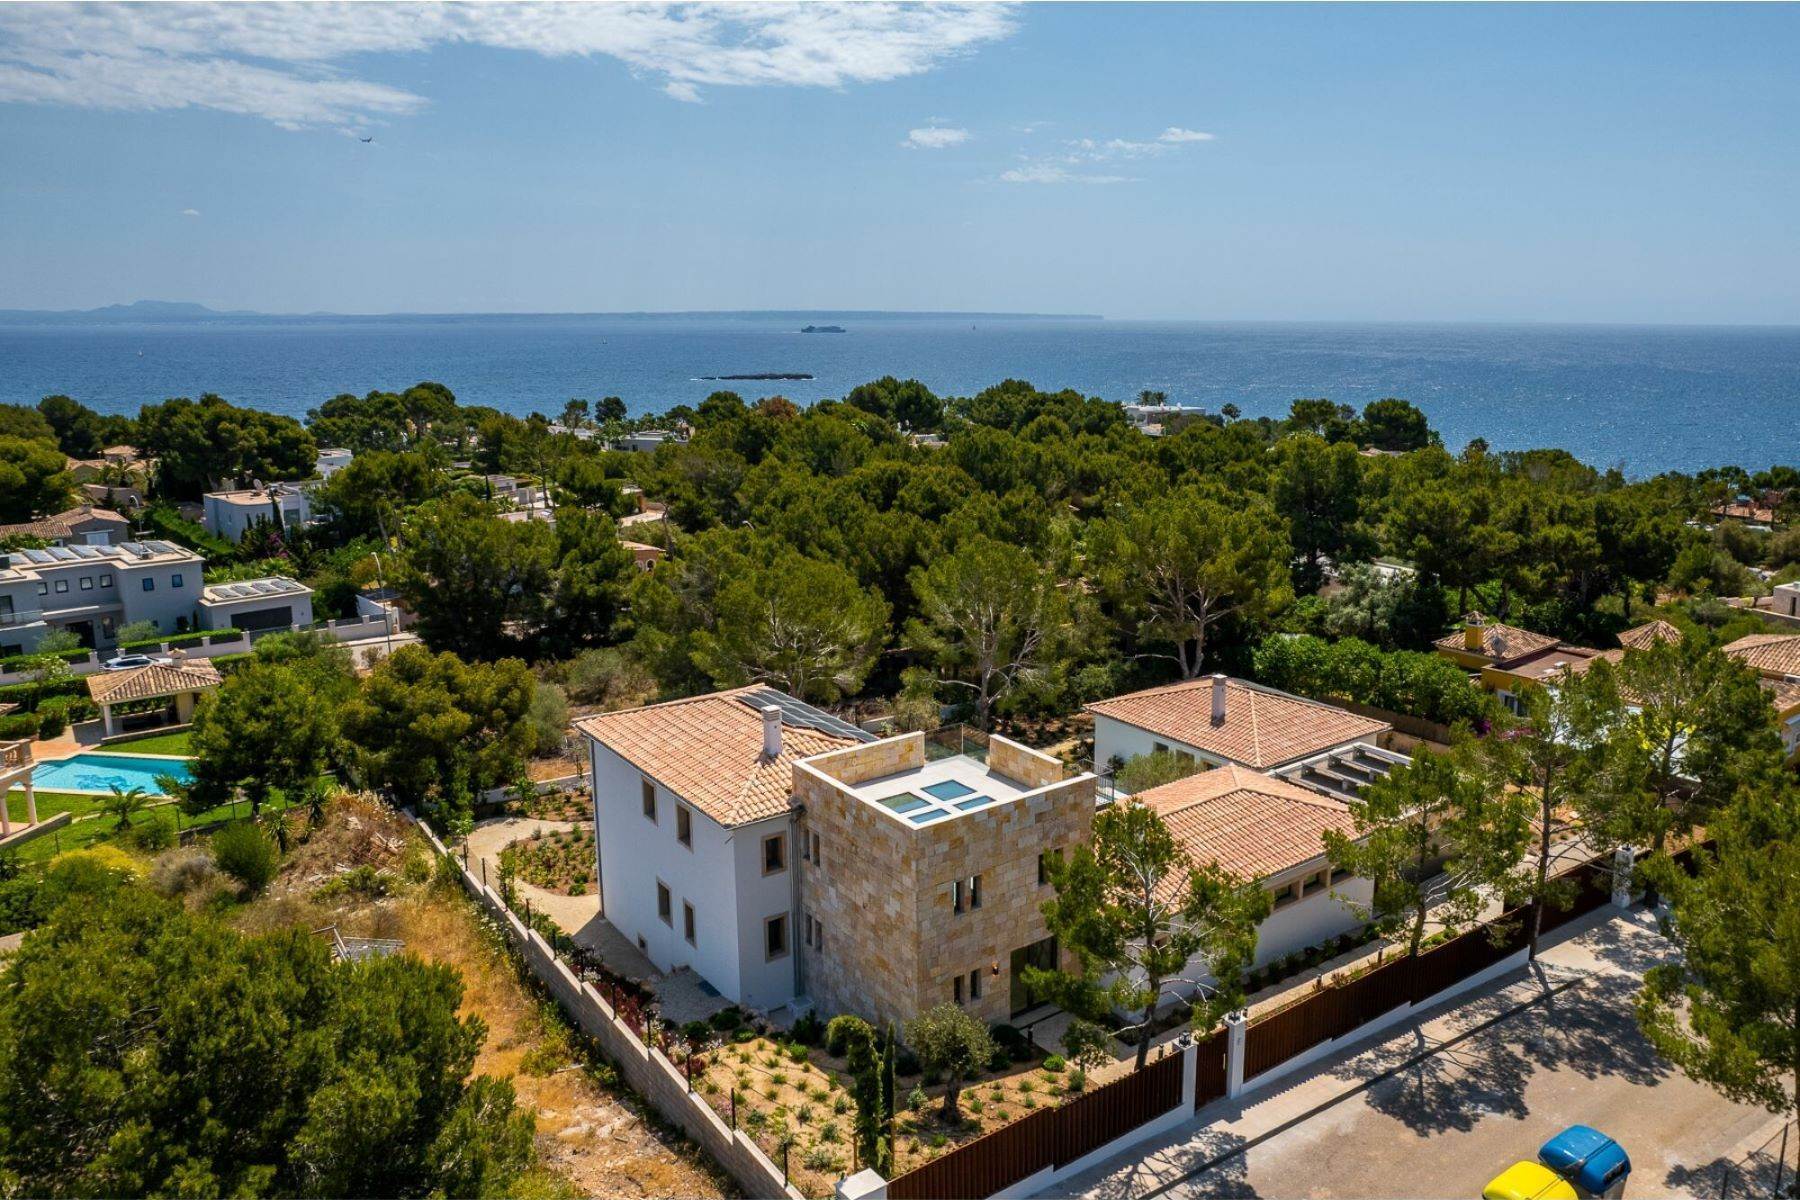 Property for Sale at Newly built mallorquin style villa in Sol de Mallorca Sol de Mallorca, Balearic Islands 07181 Spain